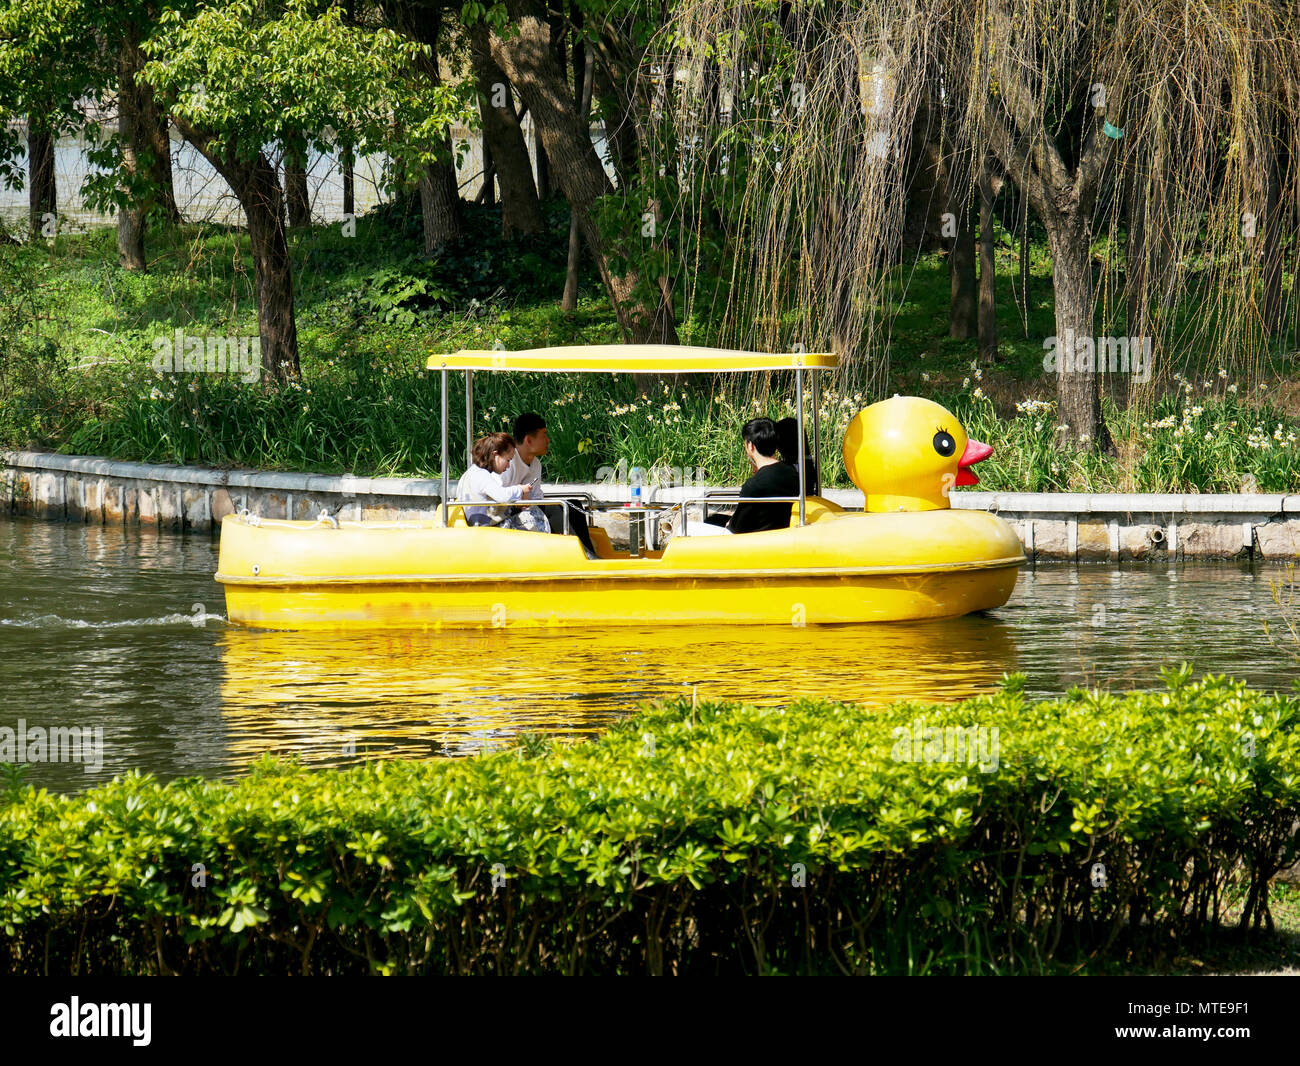 Chinese people enjoying the lake in a duck boat Stock Photo